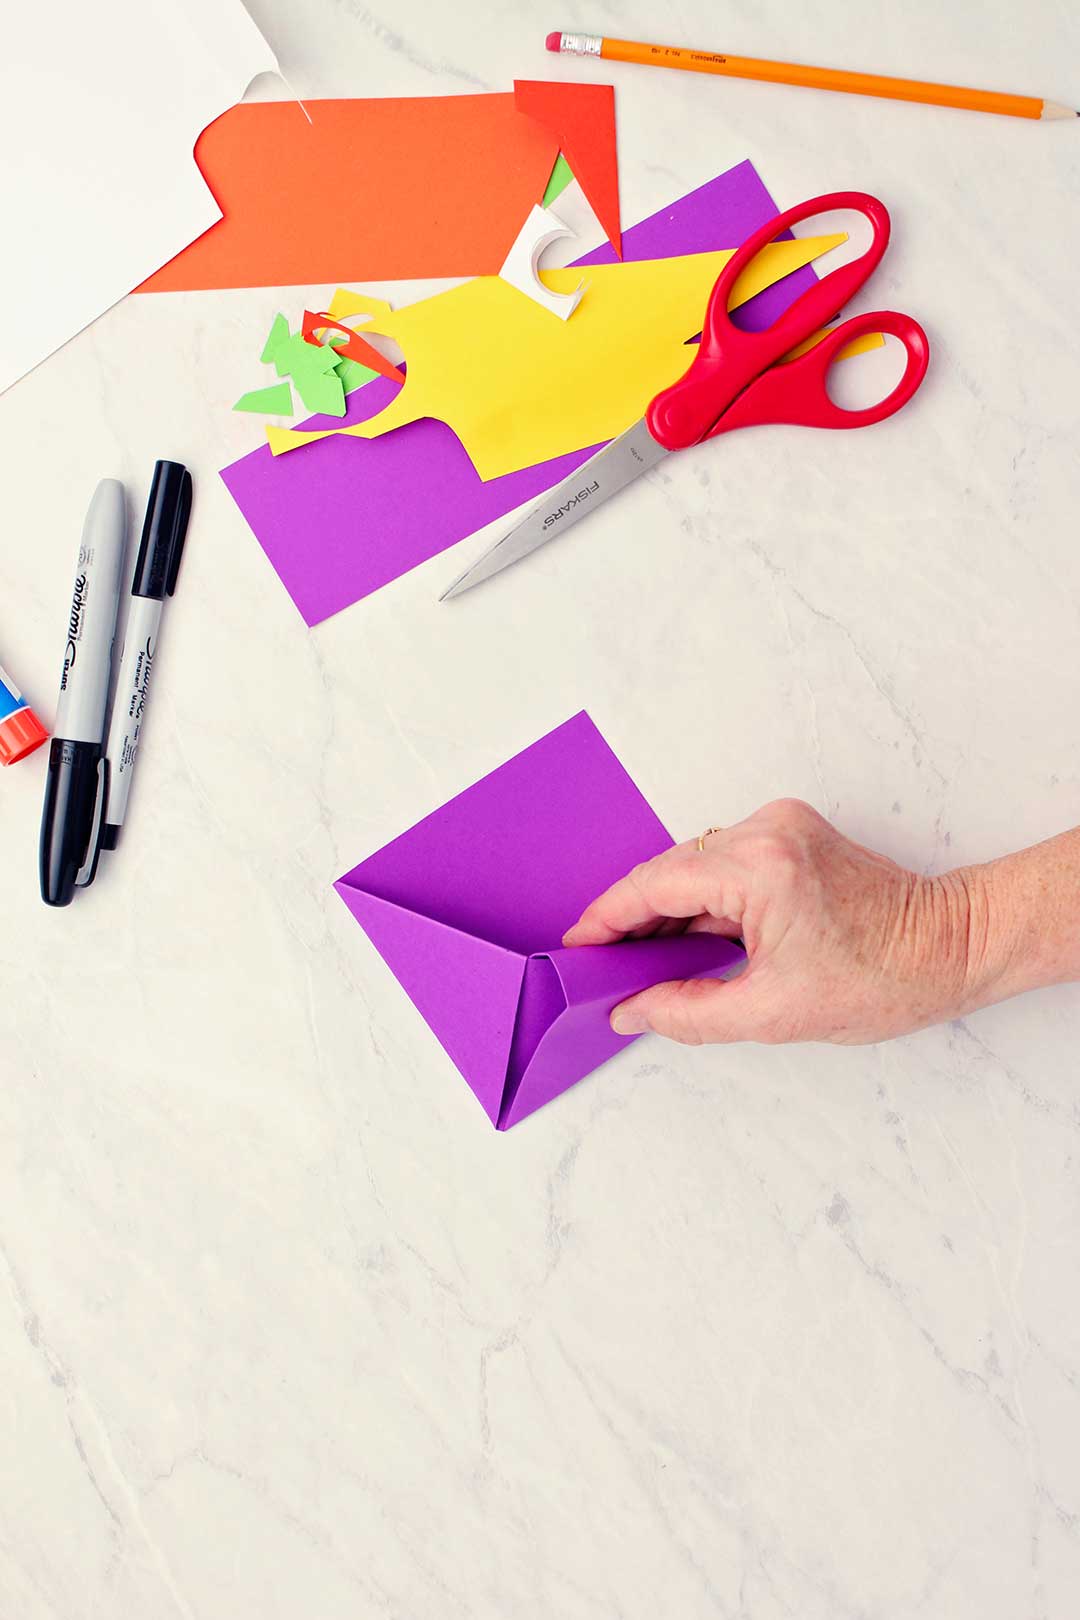 Hand folding in one of the triangle flaps of the purple paper to secure them inside the diagonal center fold.